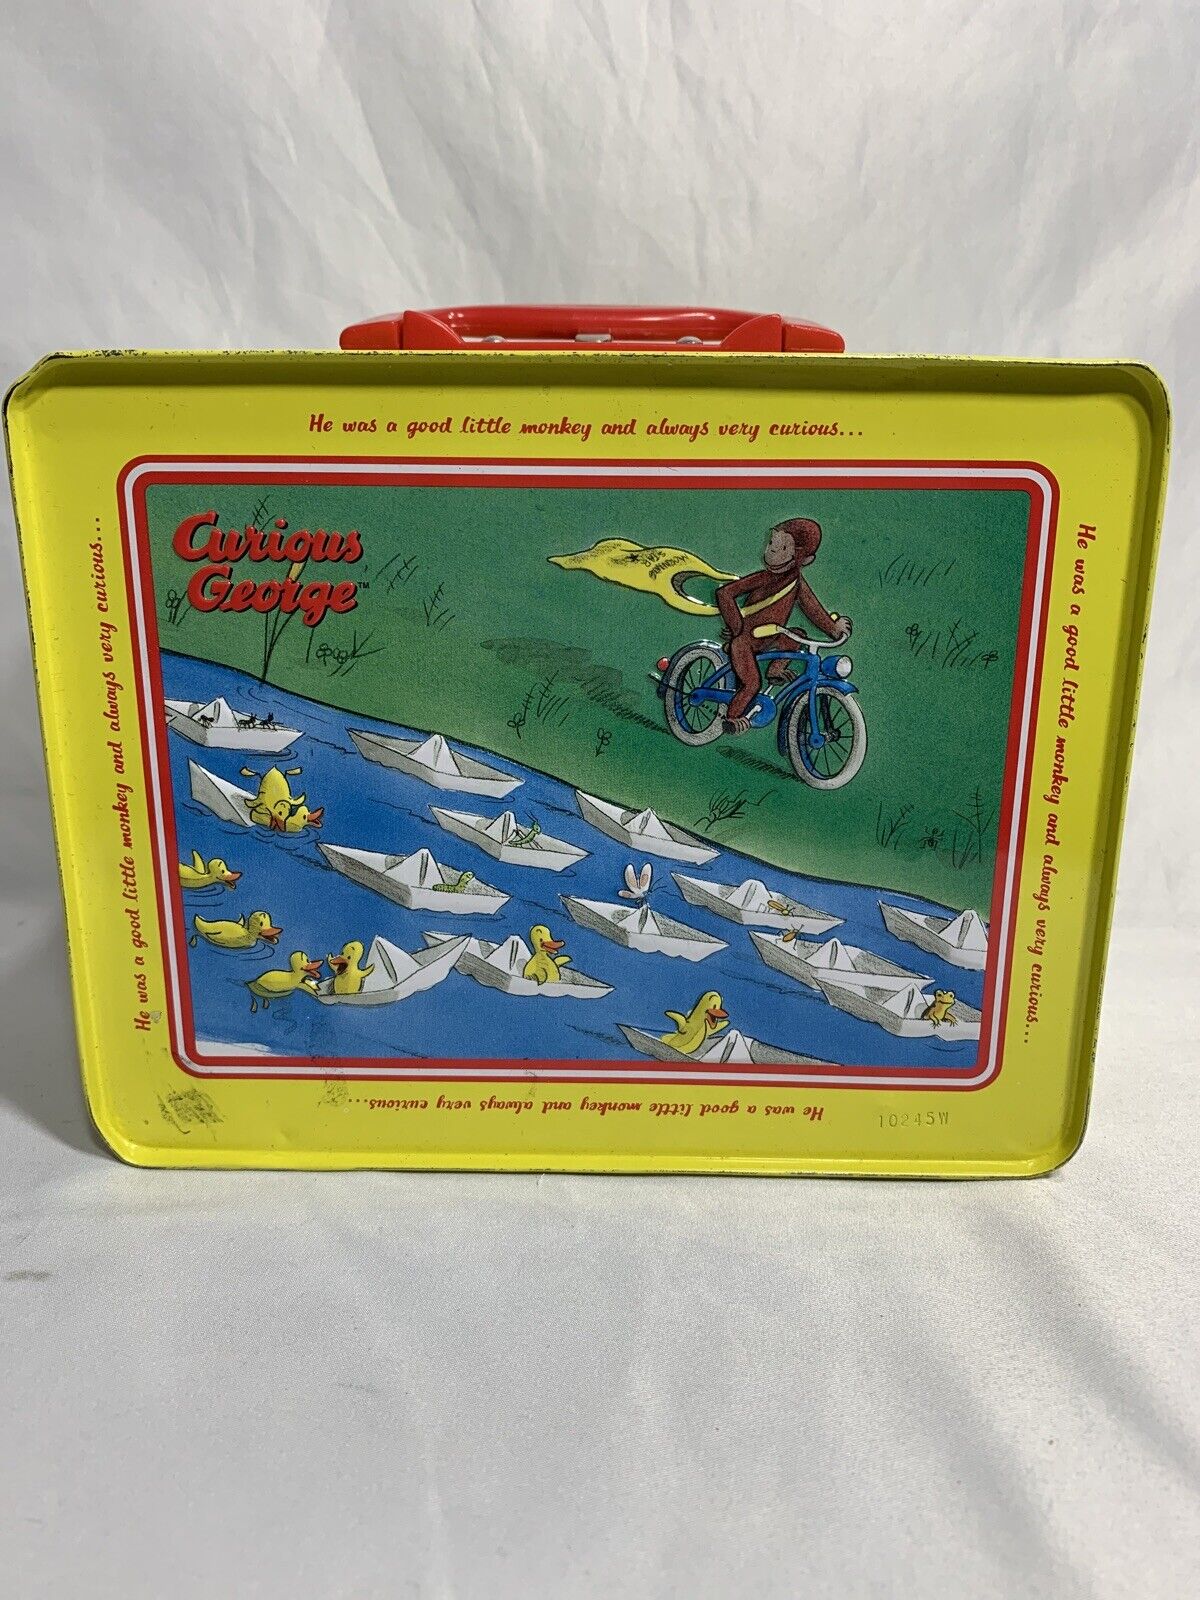 CURIOUS GEORGE Metal Lunch Box B8